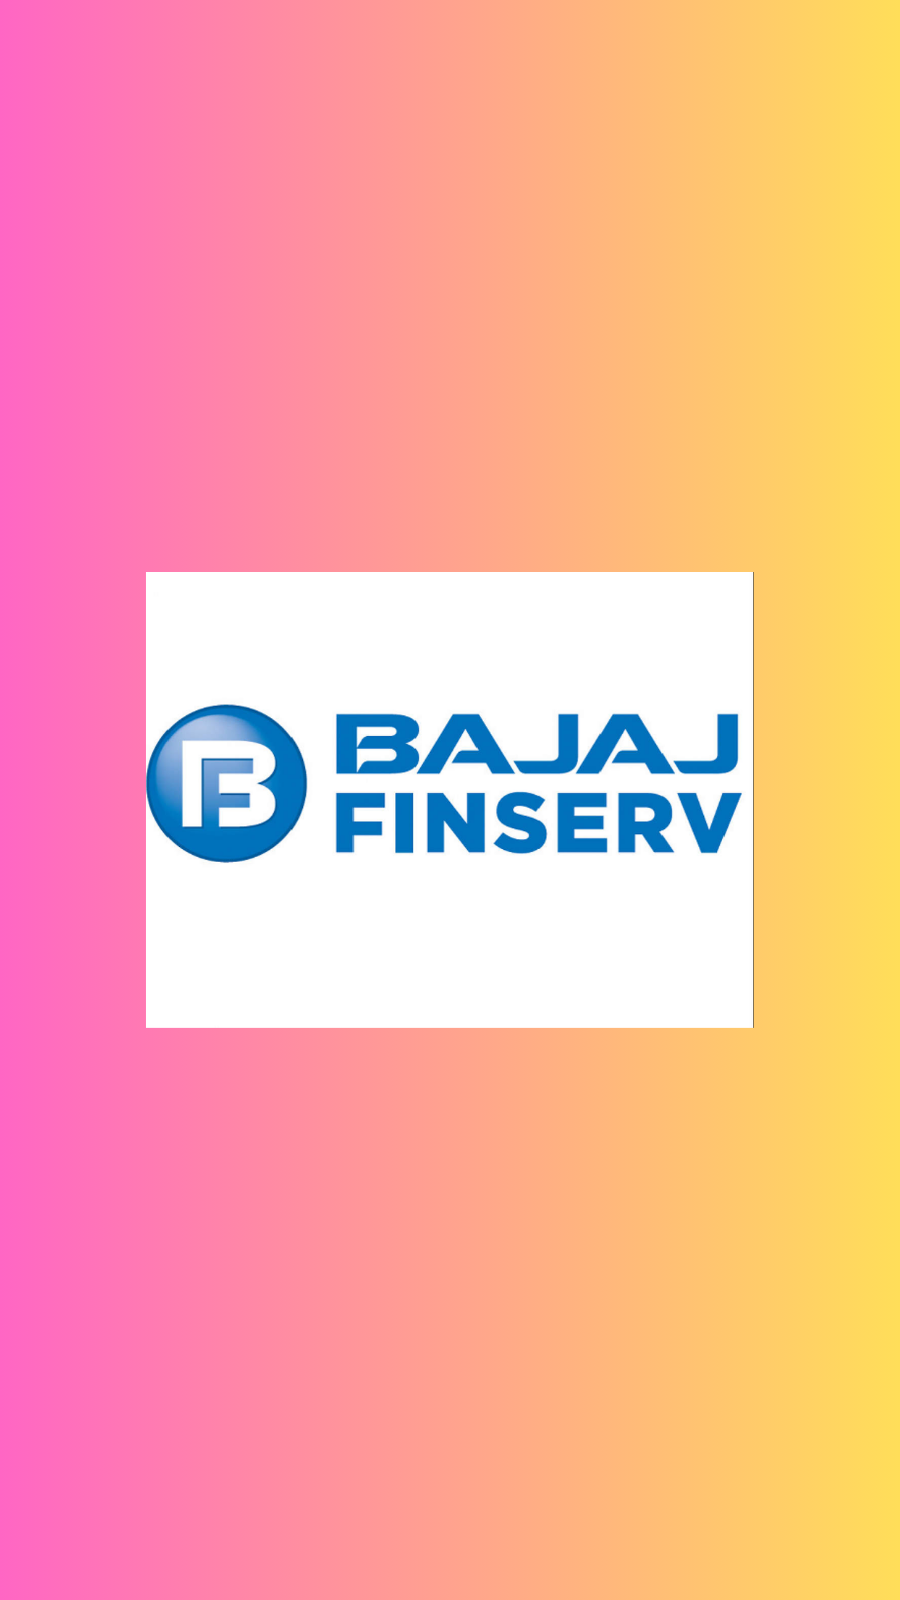 CSR-Bajaj - The official Facebook page for all corporate social  responsibility activities undertaken by the Bajaj Group of Companies. |  Facebook